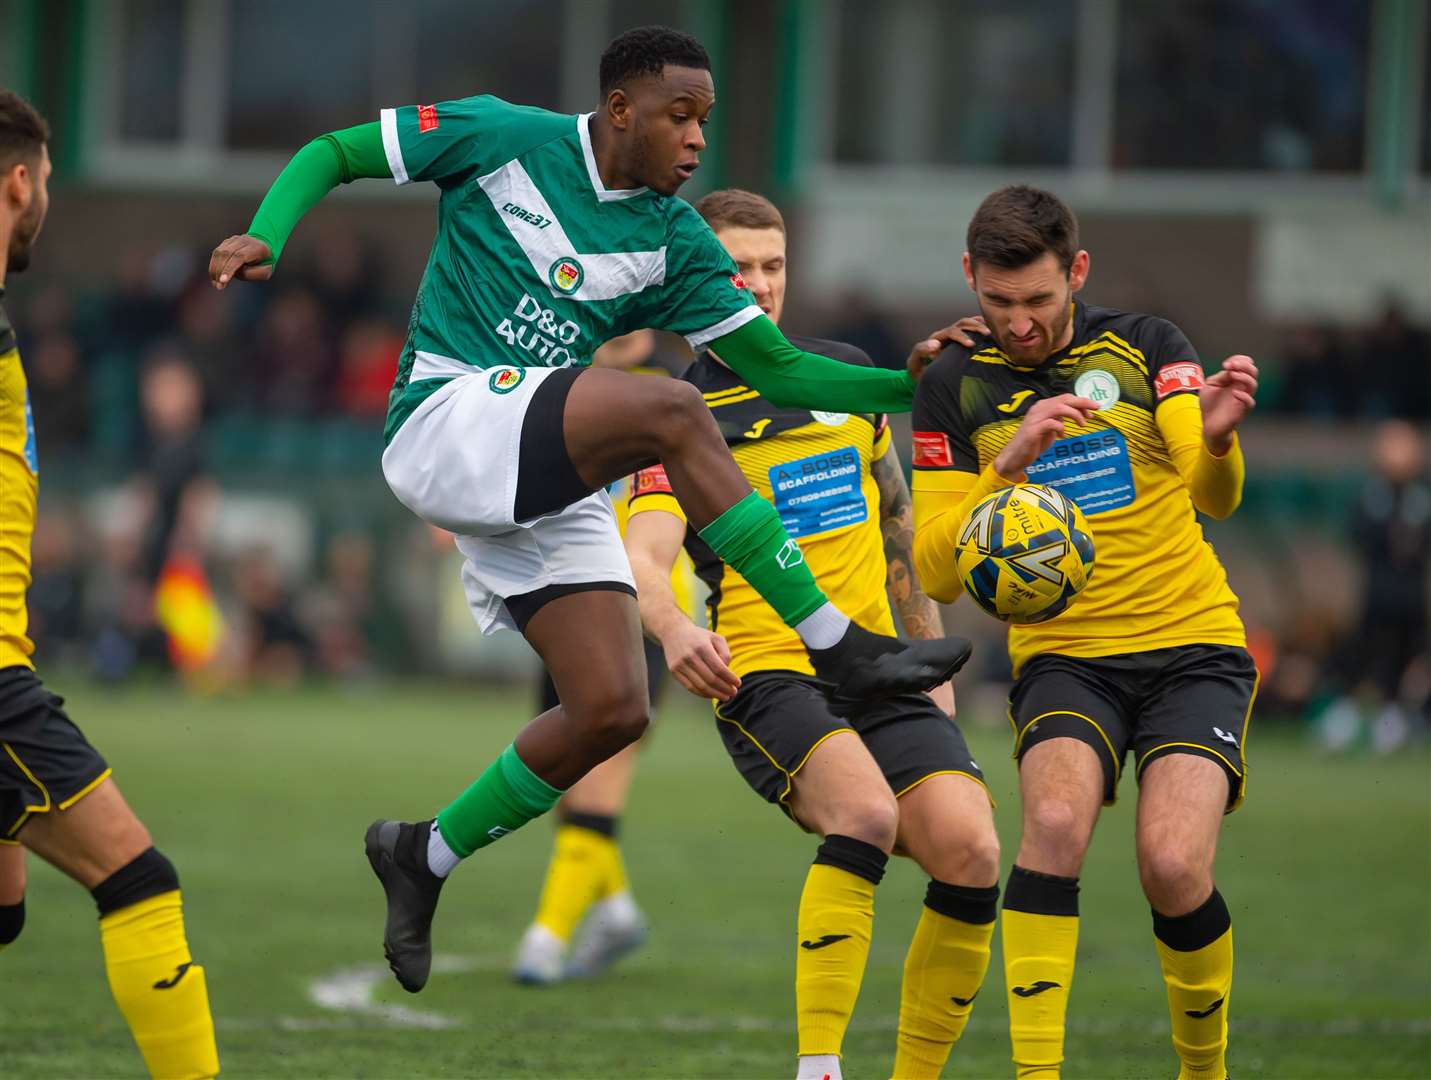 Omarr Lawson makes progress in midfield for Ashford. Picture: Ian Scammell